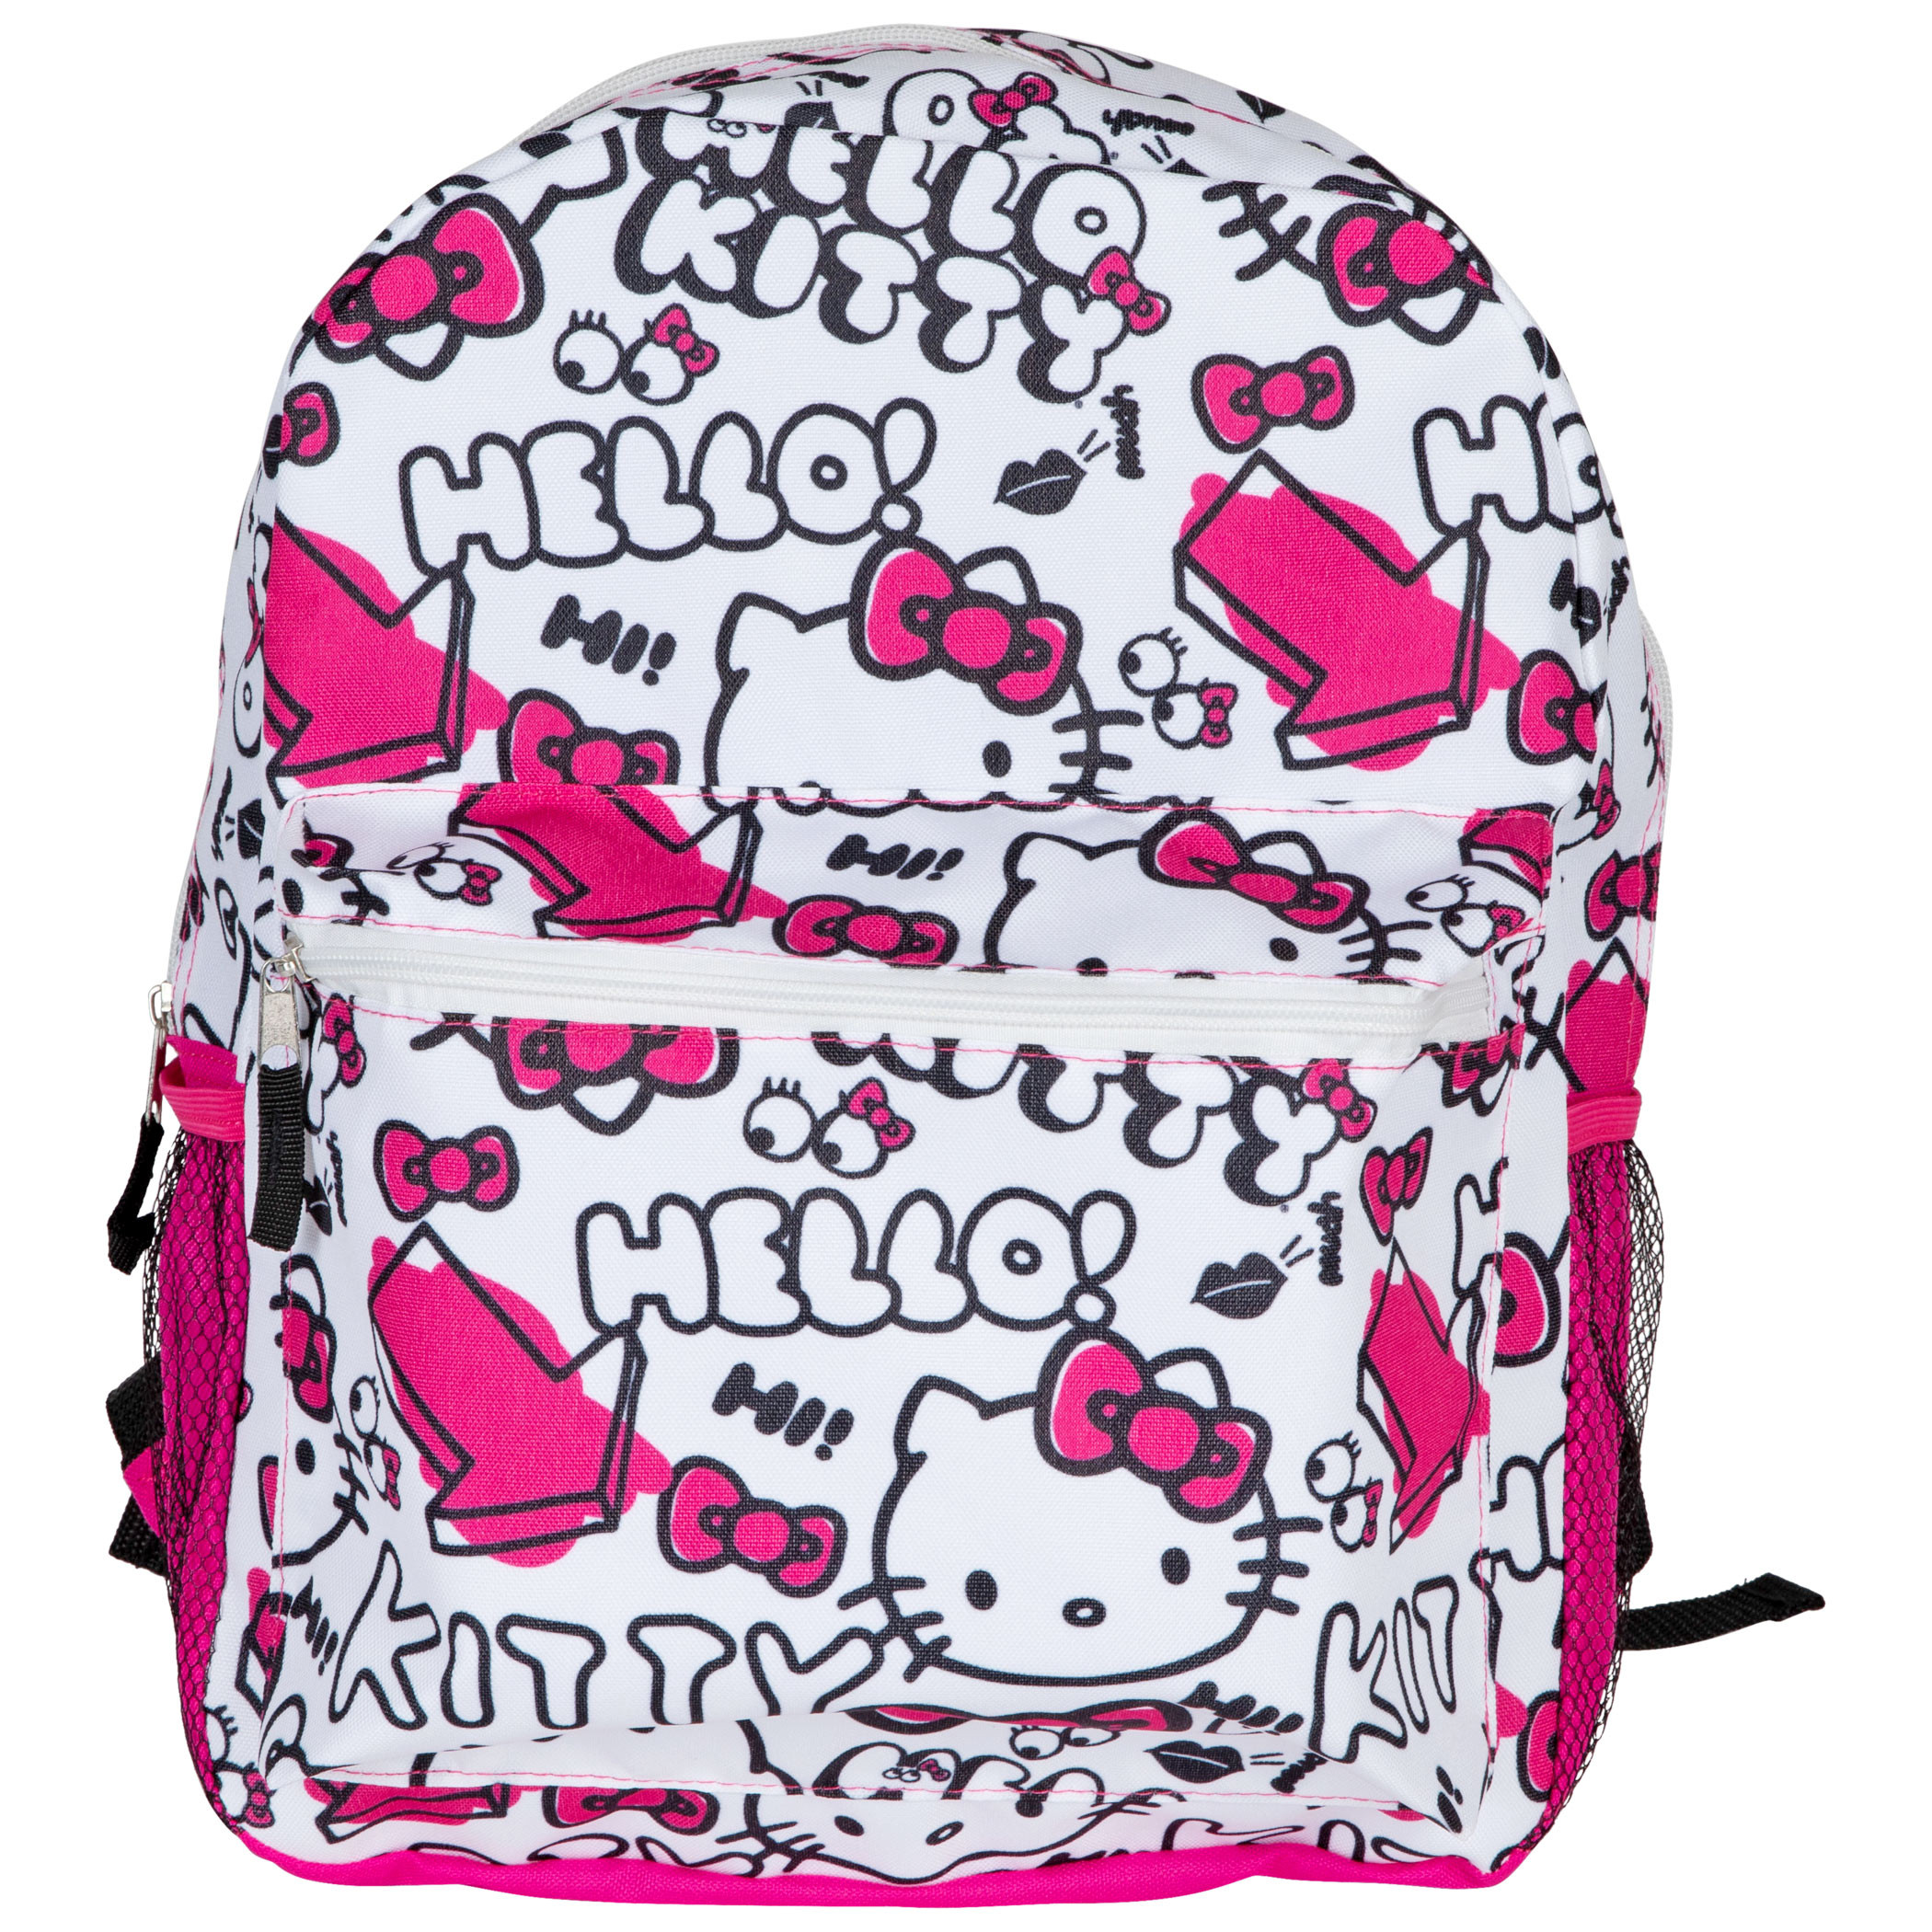 Hello Kitty Backpack for Girls - Bundle with 16 Hello Kitty School Backpack, Hello Kitty Stickers, Water Pouch, More | Hello Kitty Backpack for